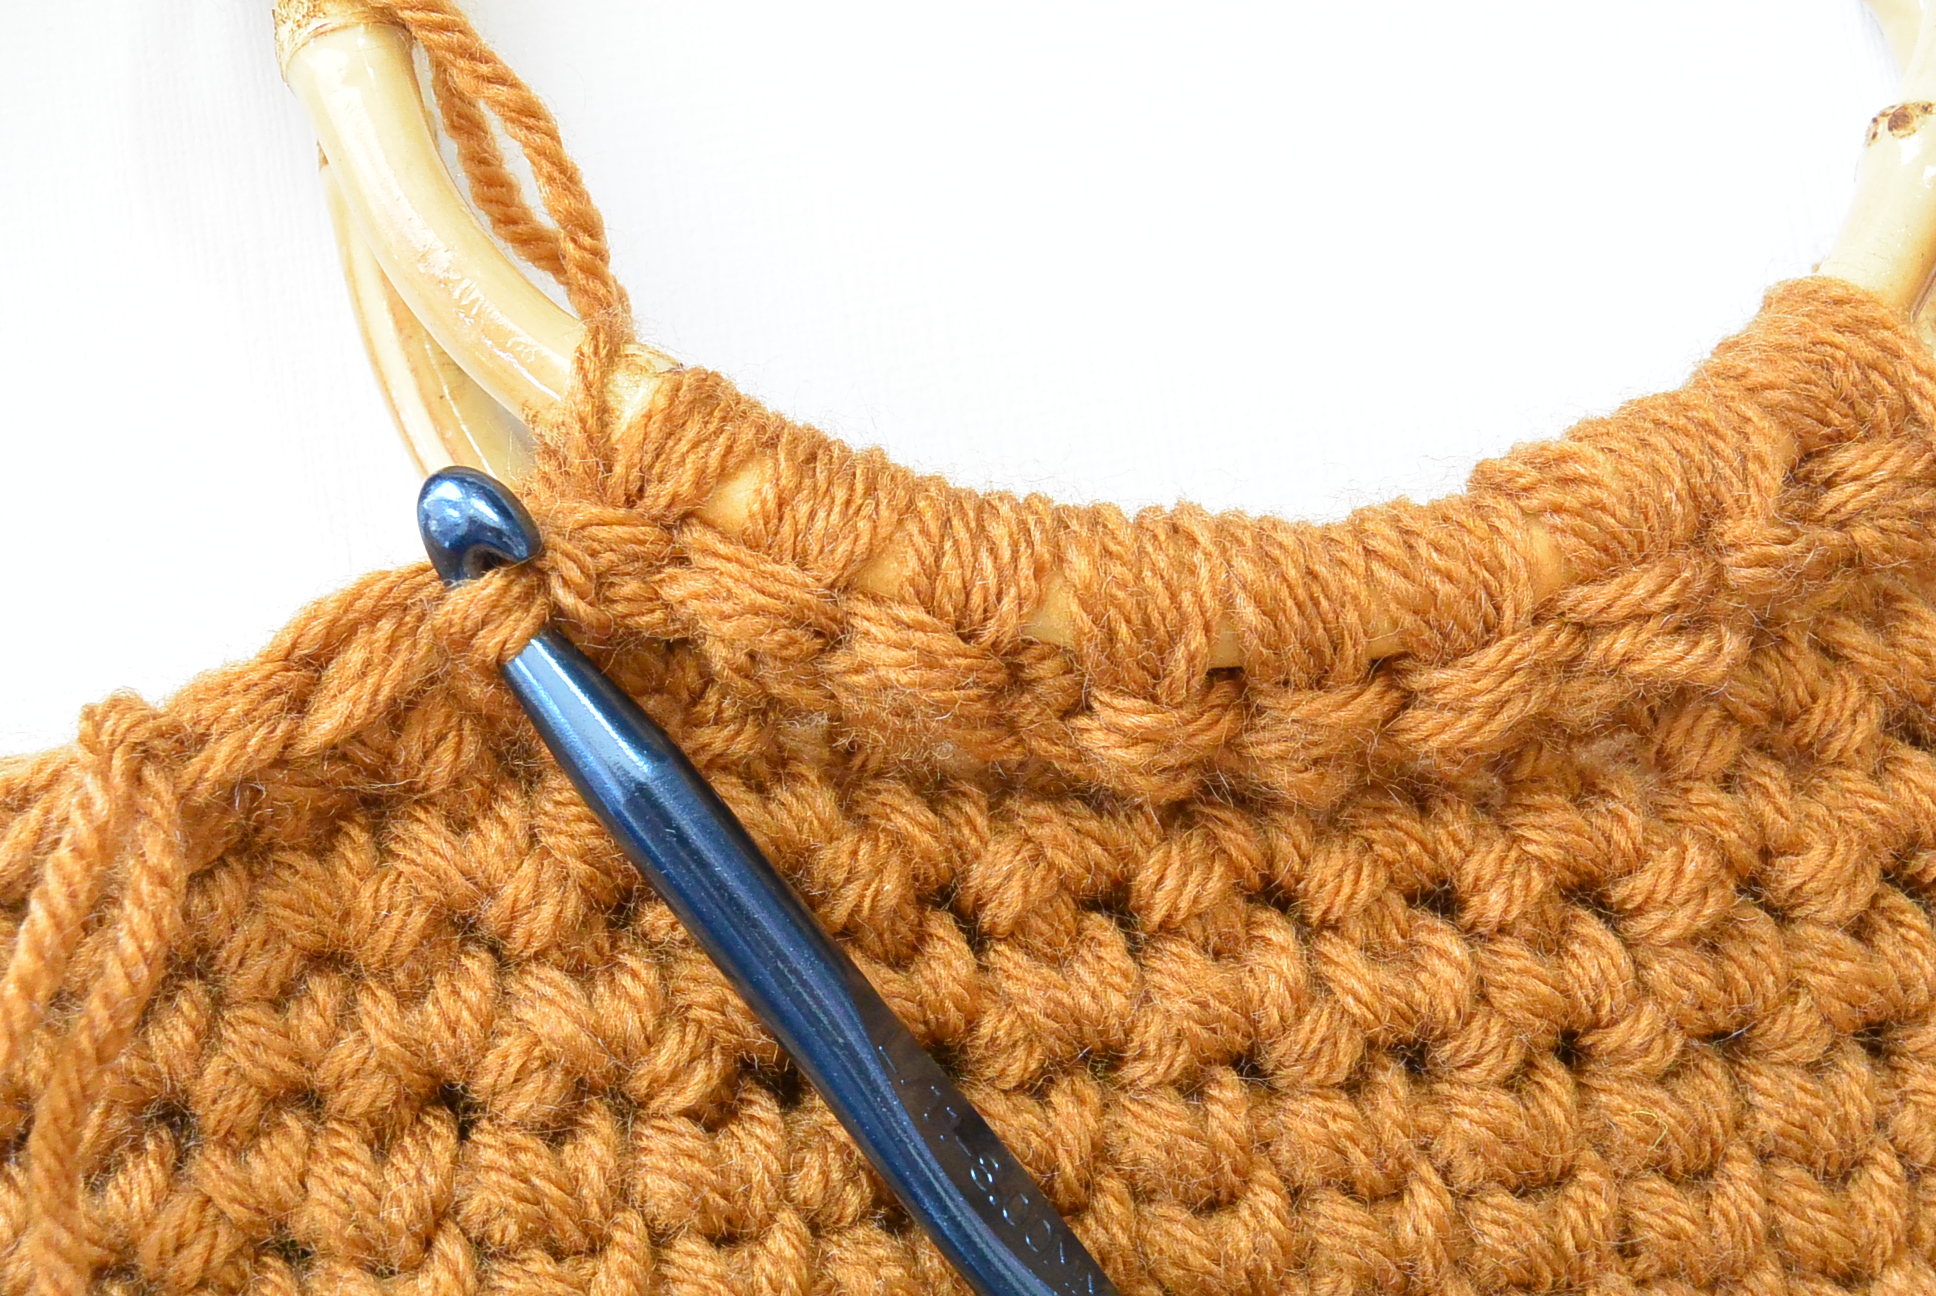 How to crochet handles on a bag, a basic pattern for bag handles